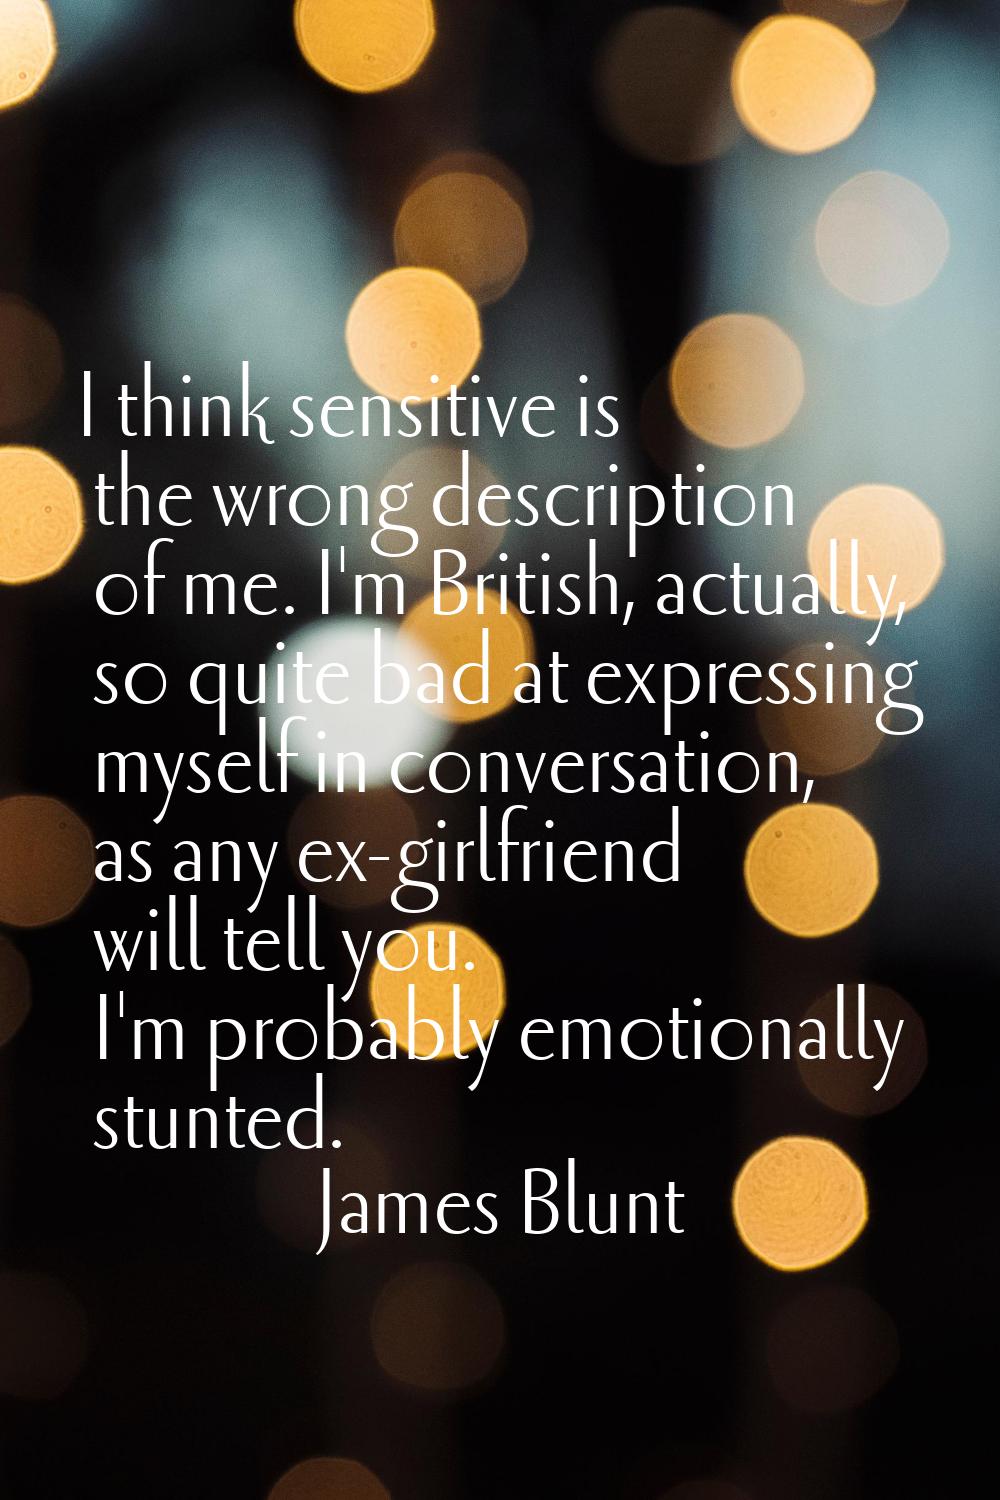 I think sensitive is the wrong description of me. I'm British, actually, so quite bad at expressing